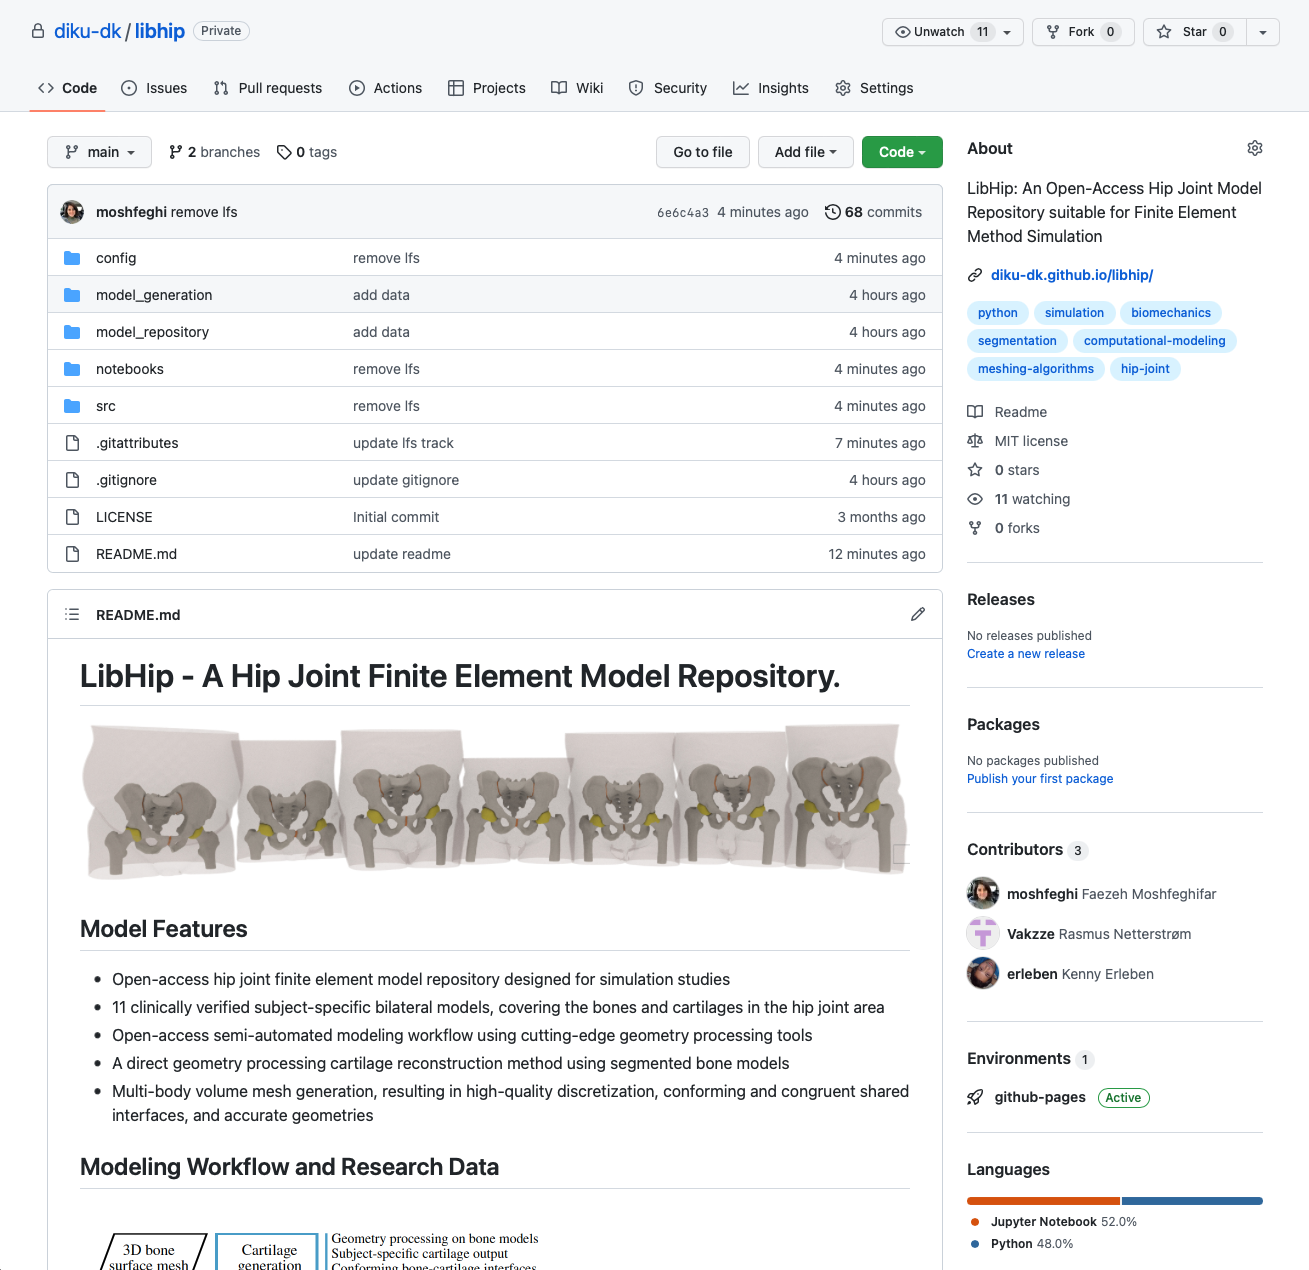 Screenshot of the main interface of the GitHub repository